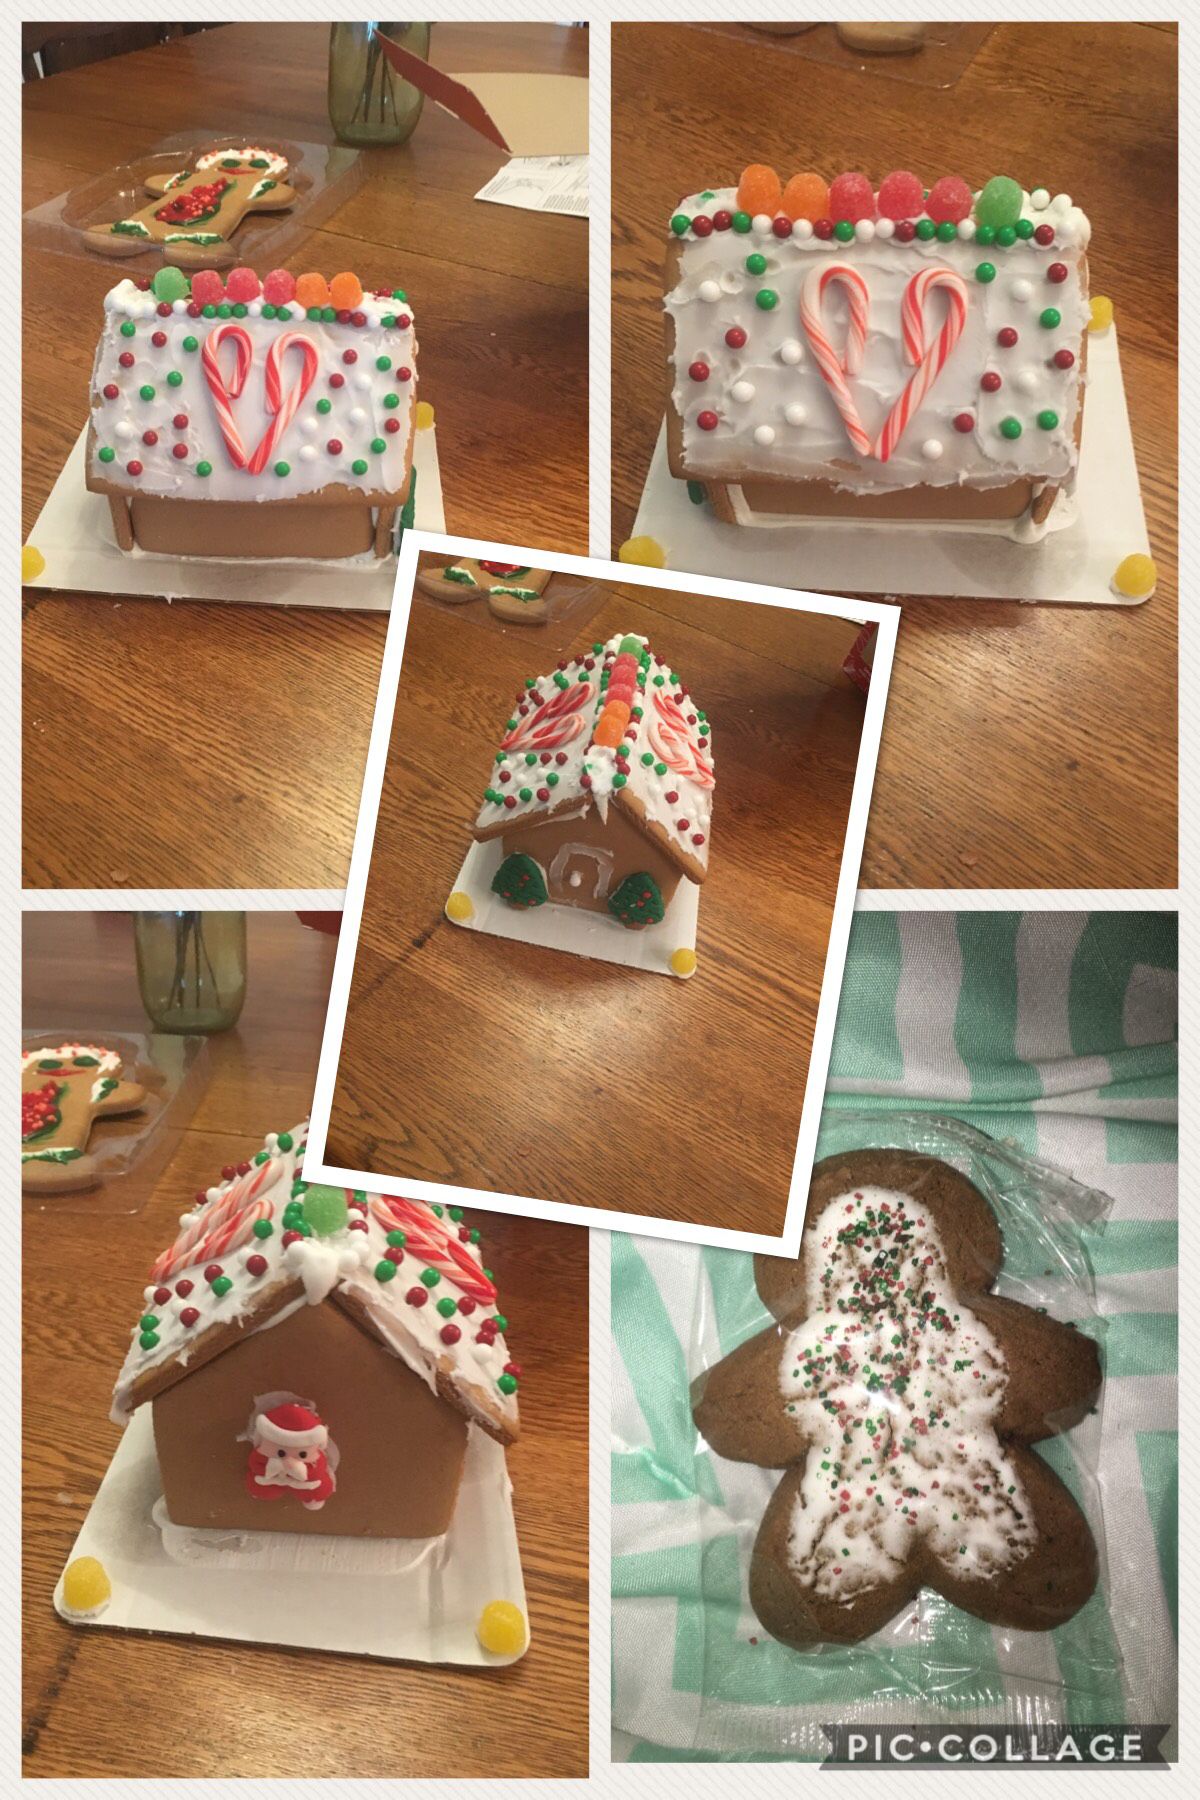 I am not that good at decorating gingerbread but at least I tried! (Also my dad kinda forced me